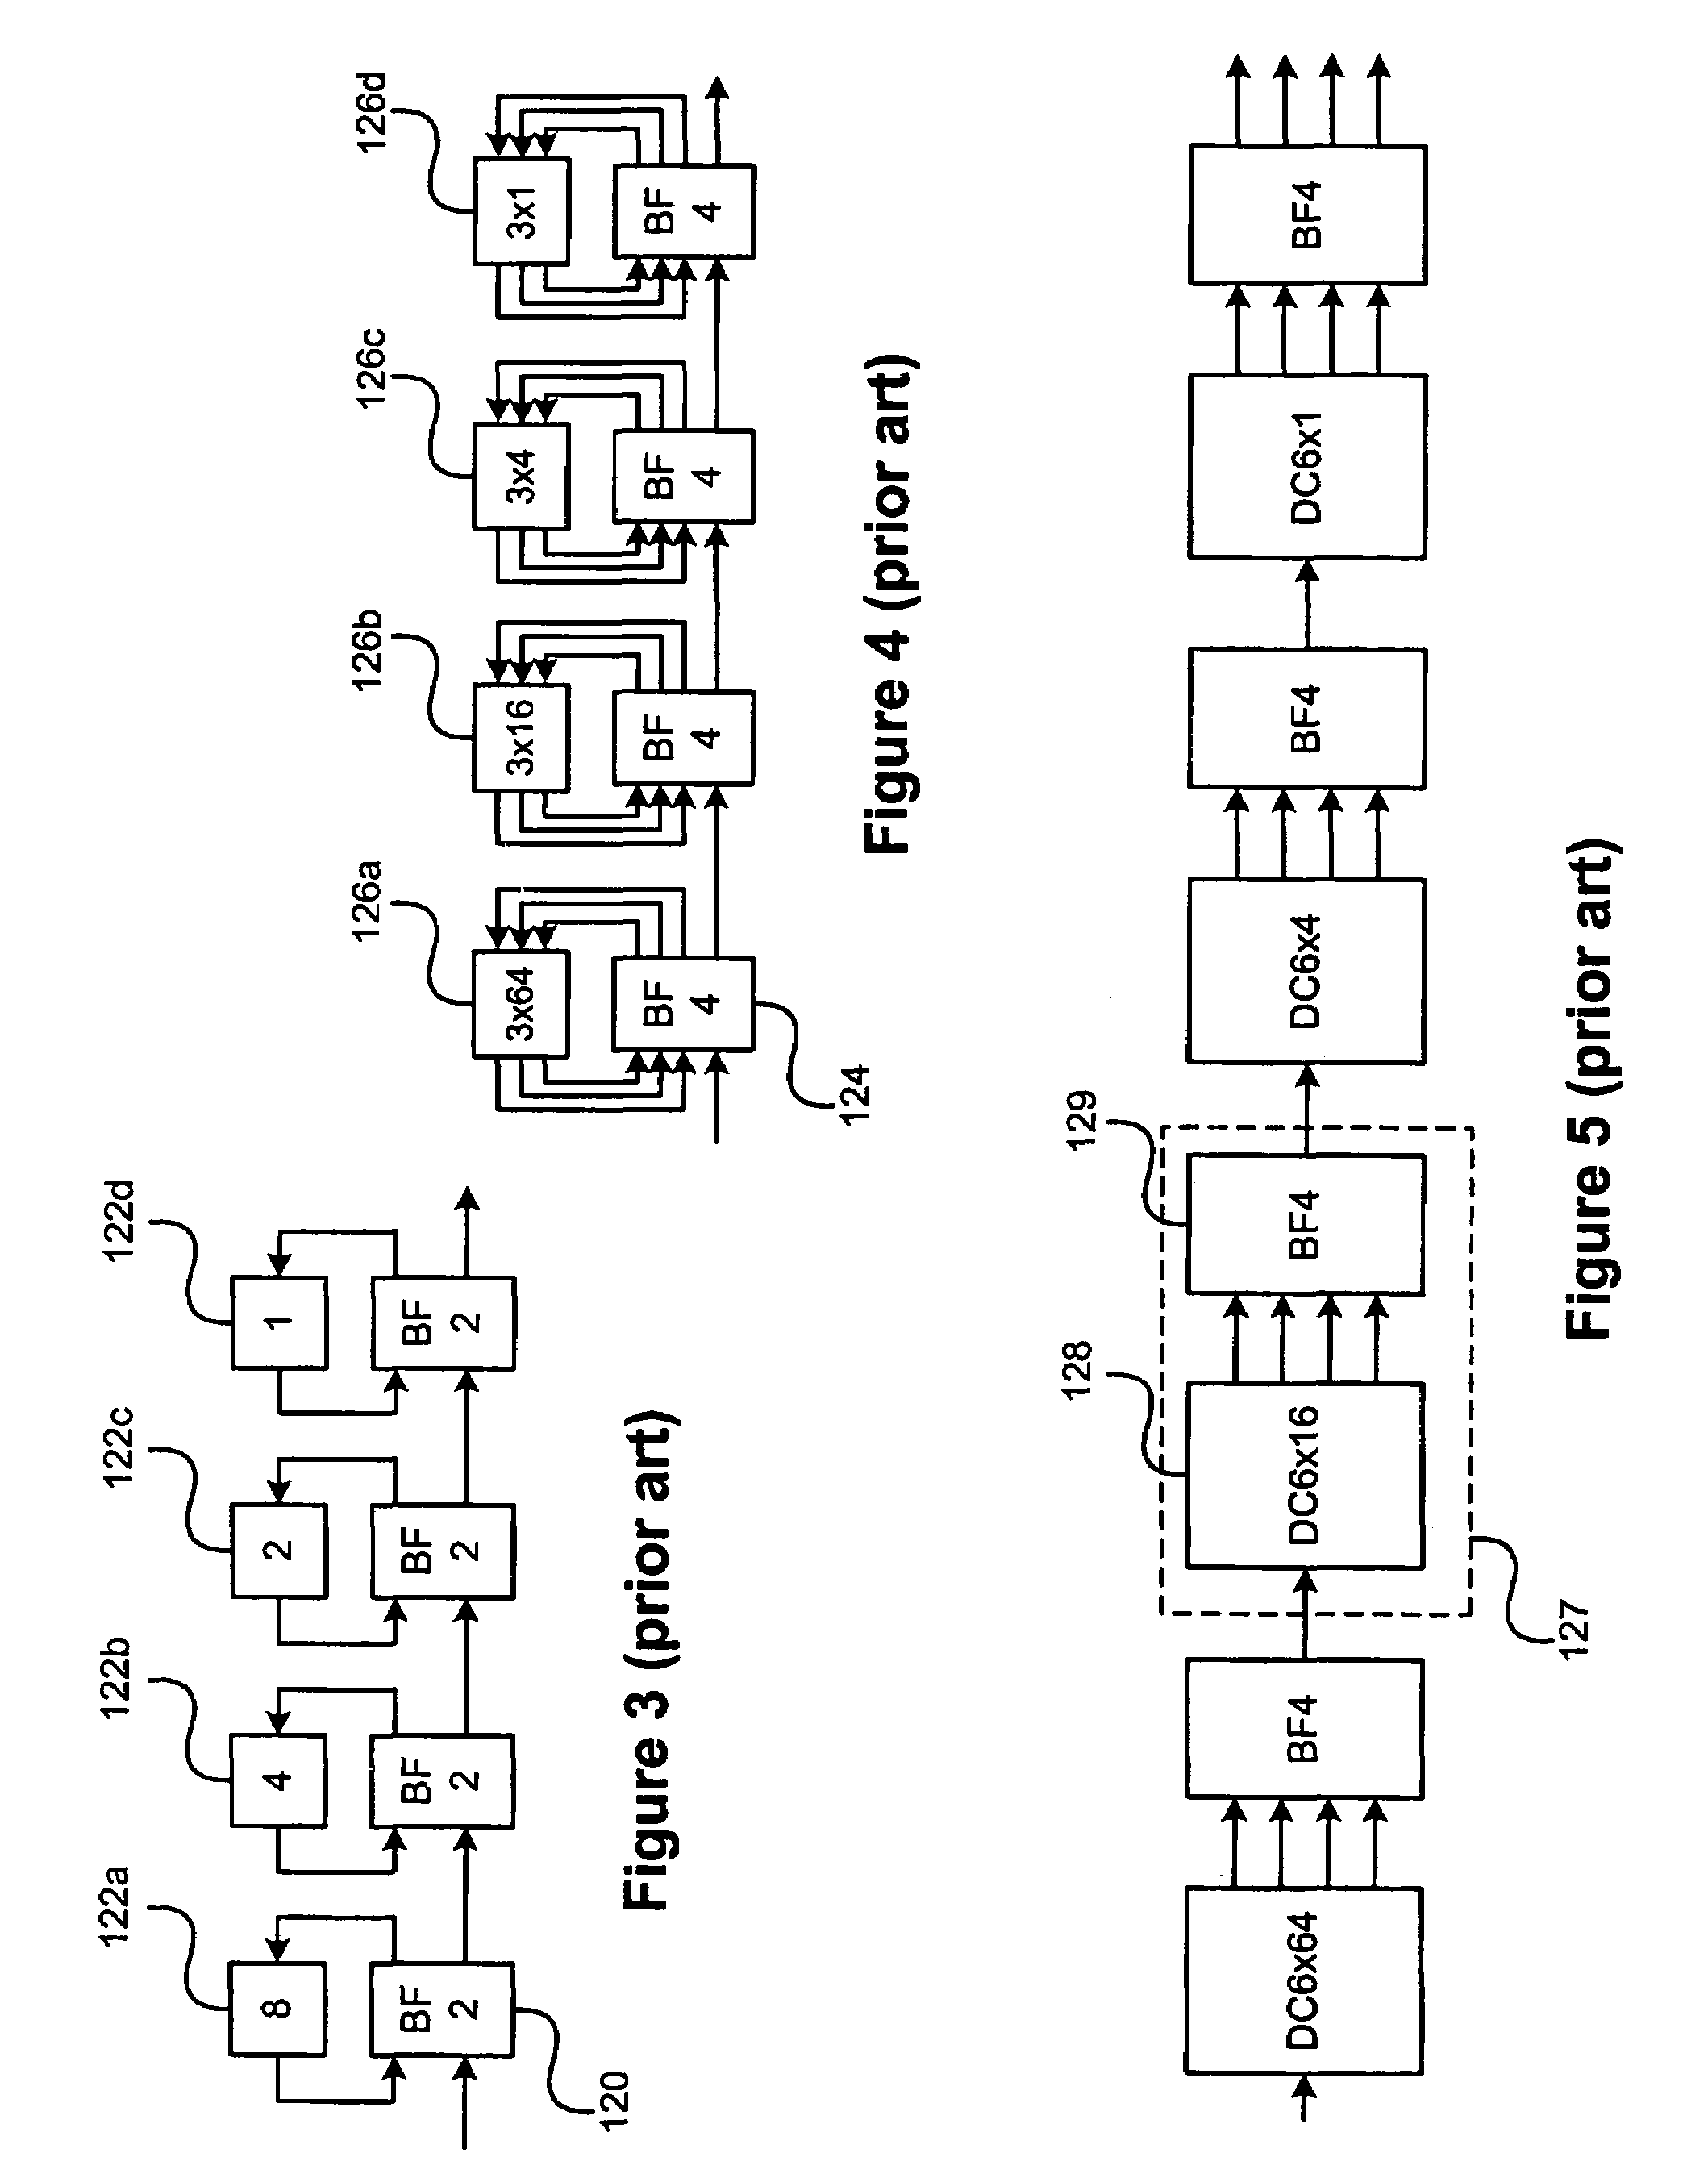 Pipelined FFT processor with memory address interleaving